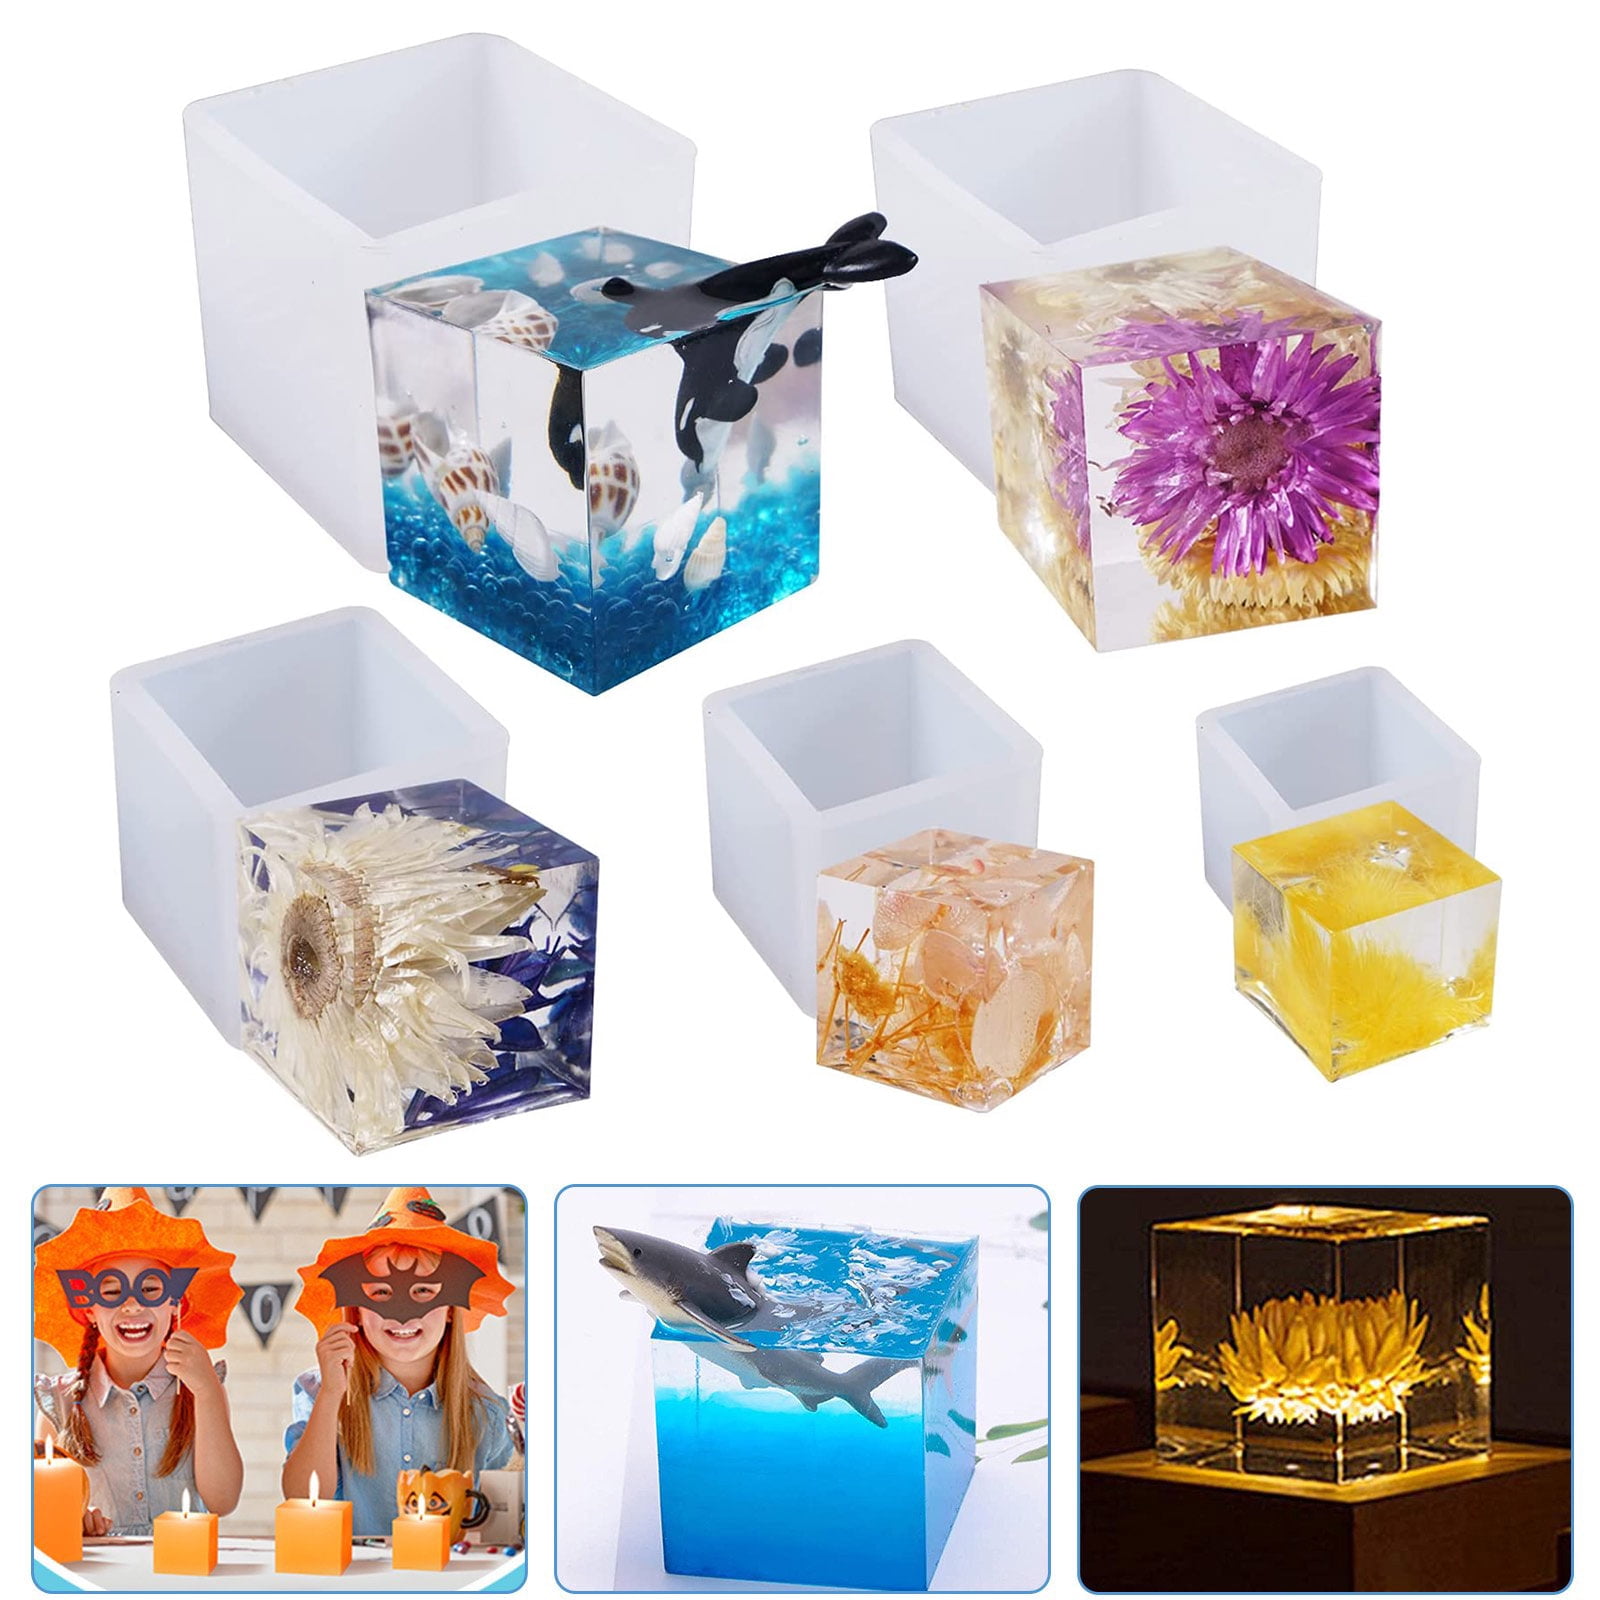 Resin Molds Silicone 5Pcs - Epoxy Resin Molds Including Sphere, Cube,  Pyramid, Square, Round - Silicone Molds for Epoxy Resin with Silicone  Measuring Cup and More 